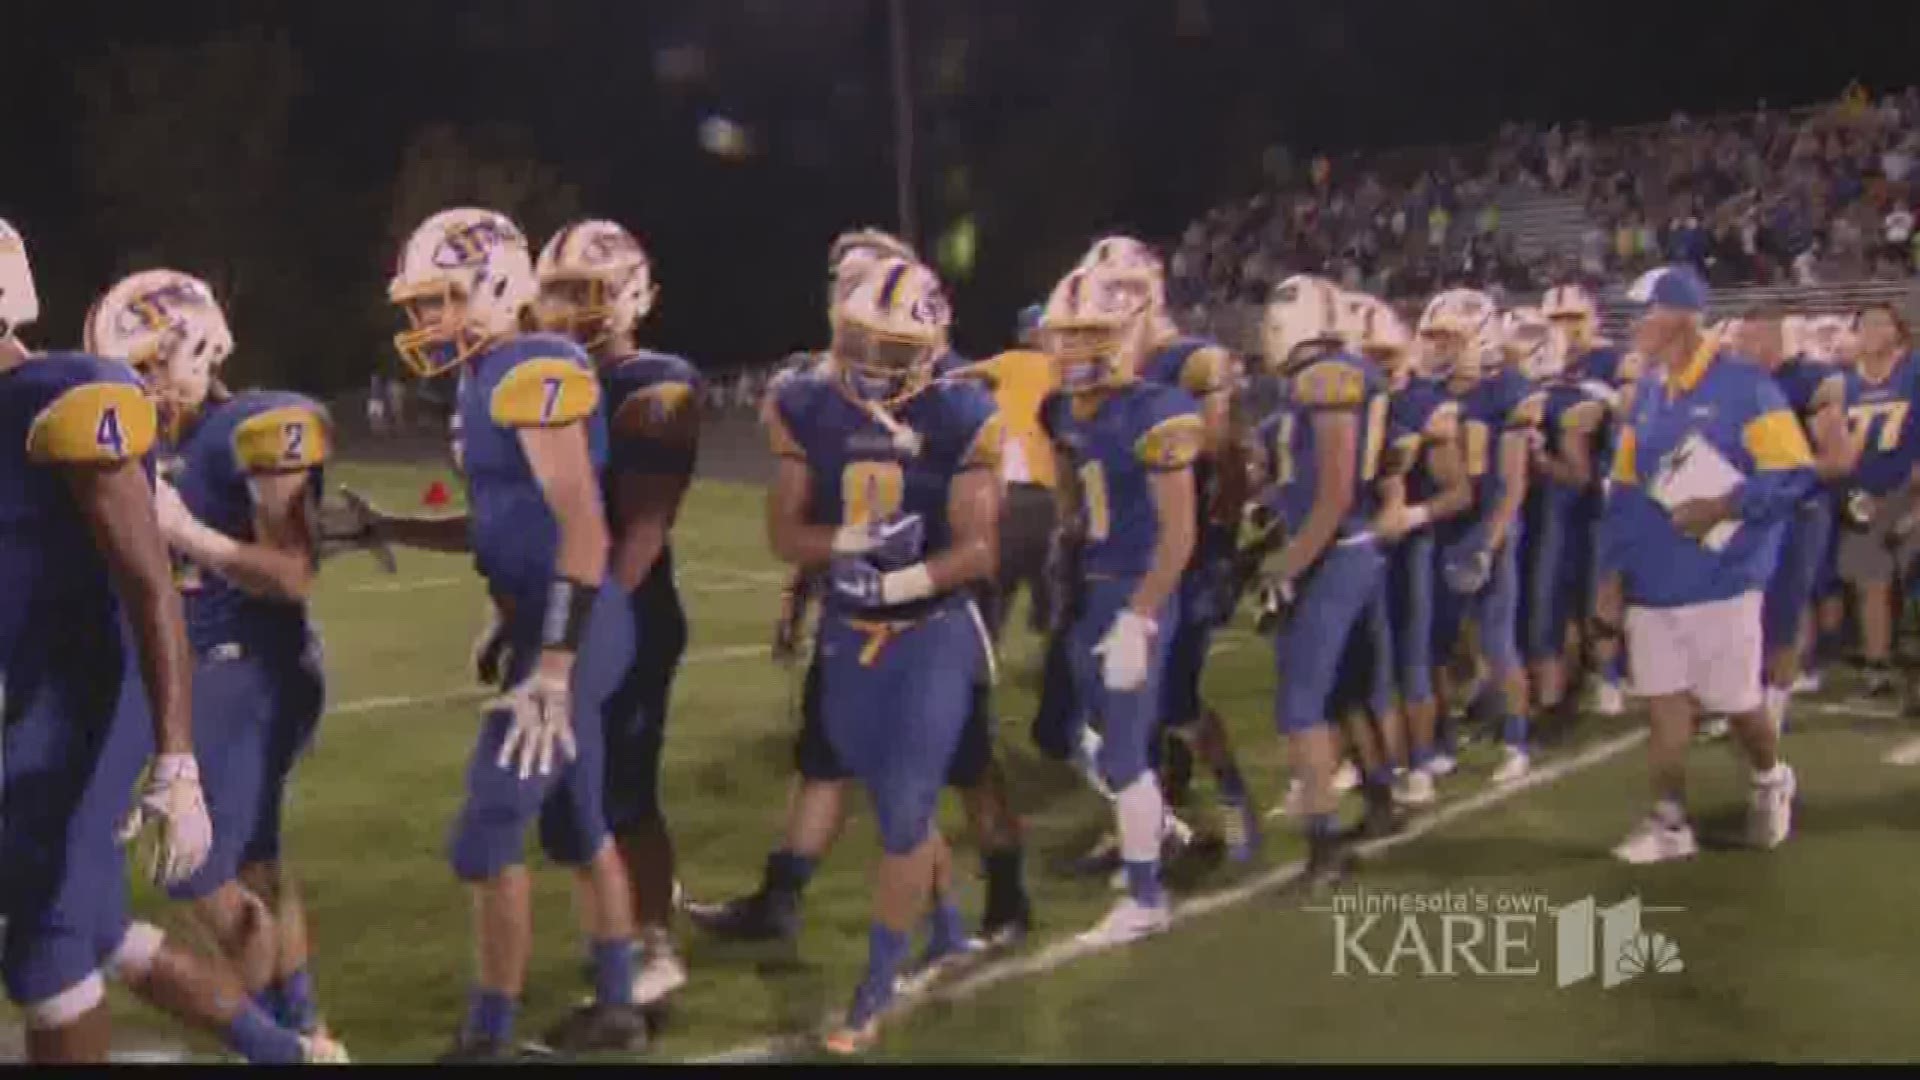 Randy Shaver hosts the 34th year of KARE 11's Prep Sports Extra. Watch the highlights from Friday, Sept. 15, 2017.